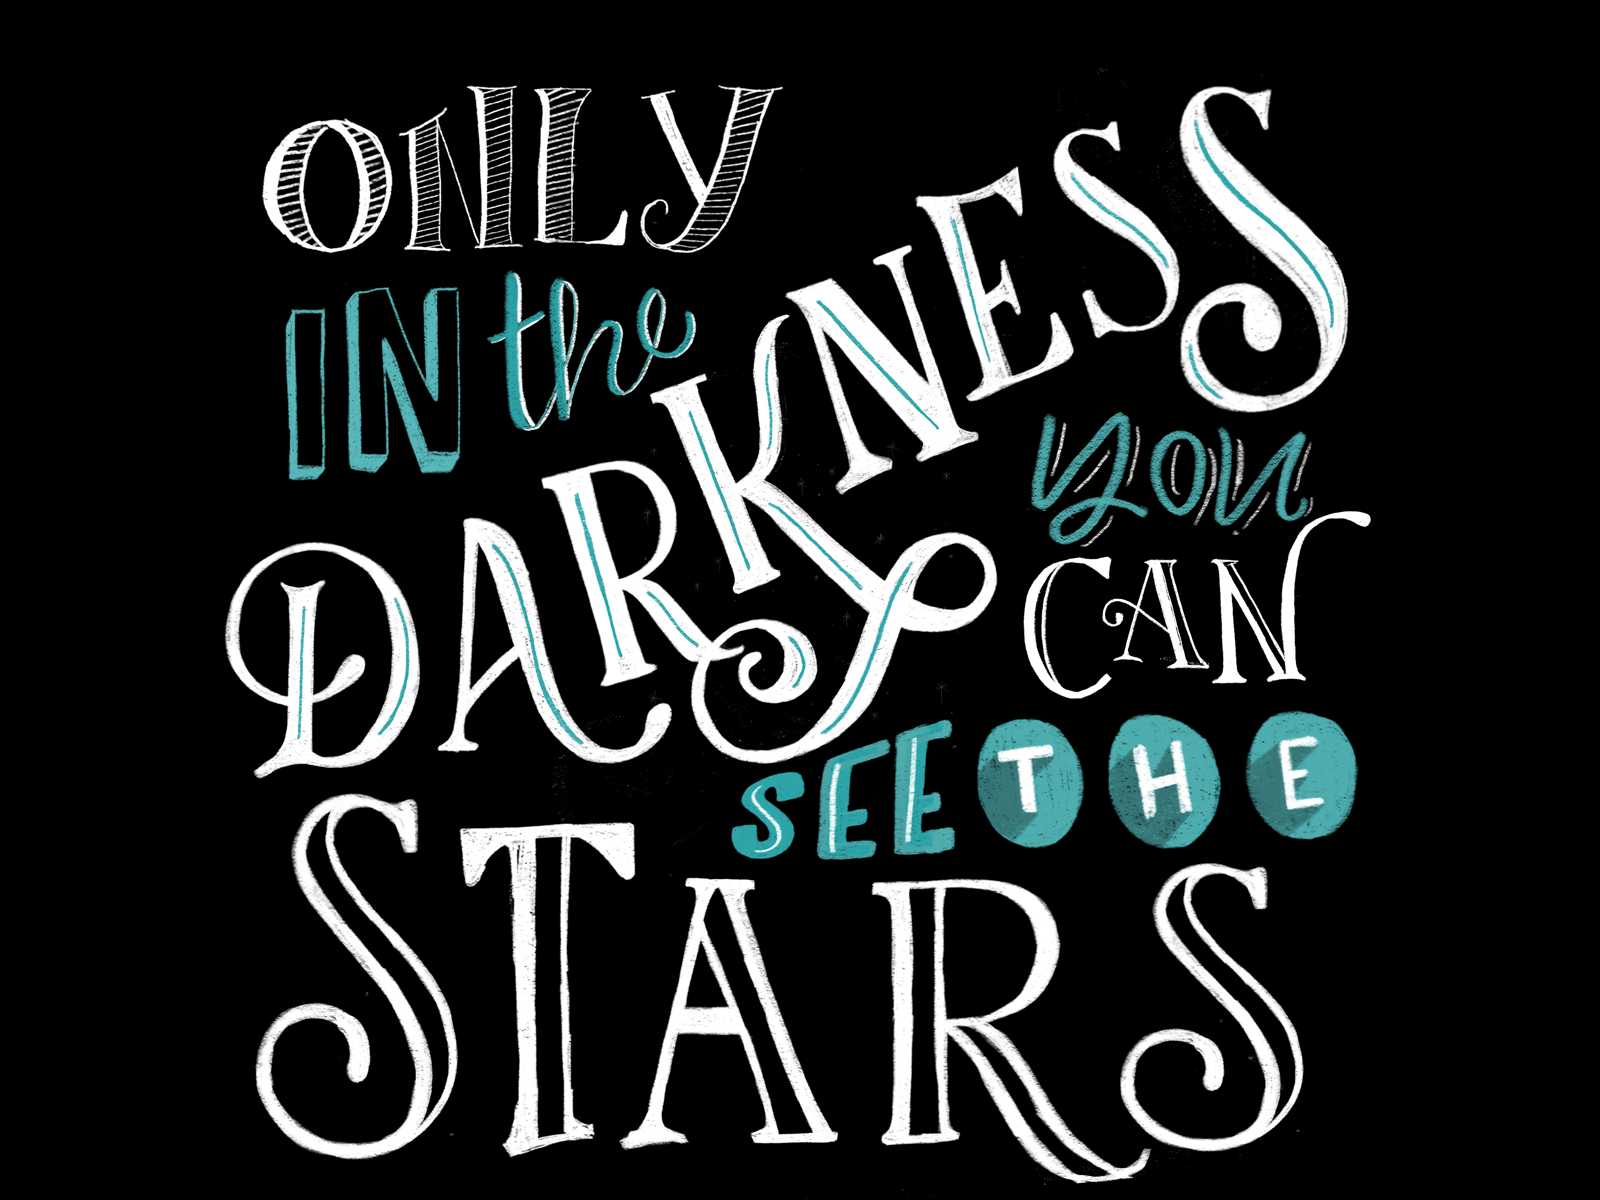 Another Lettering Quote